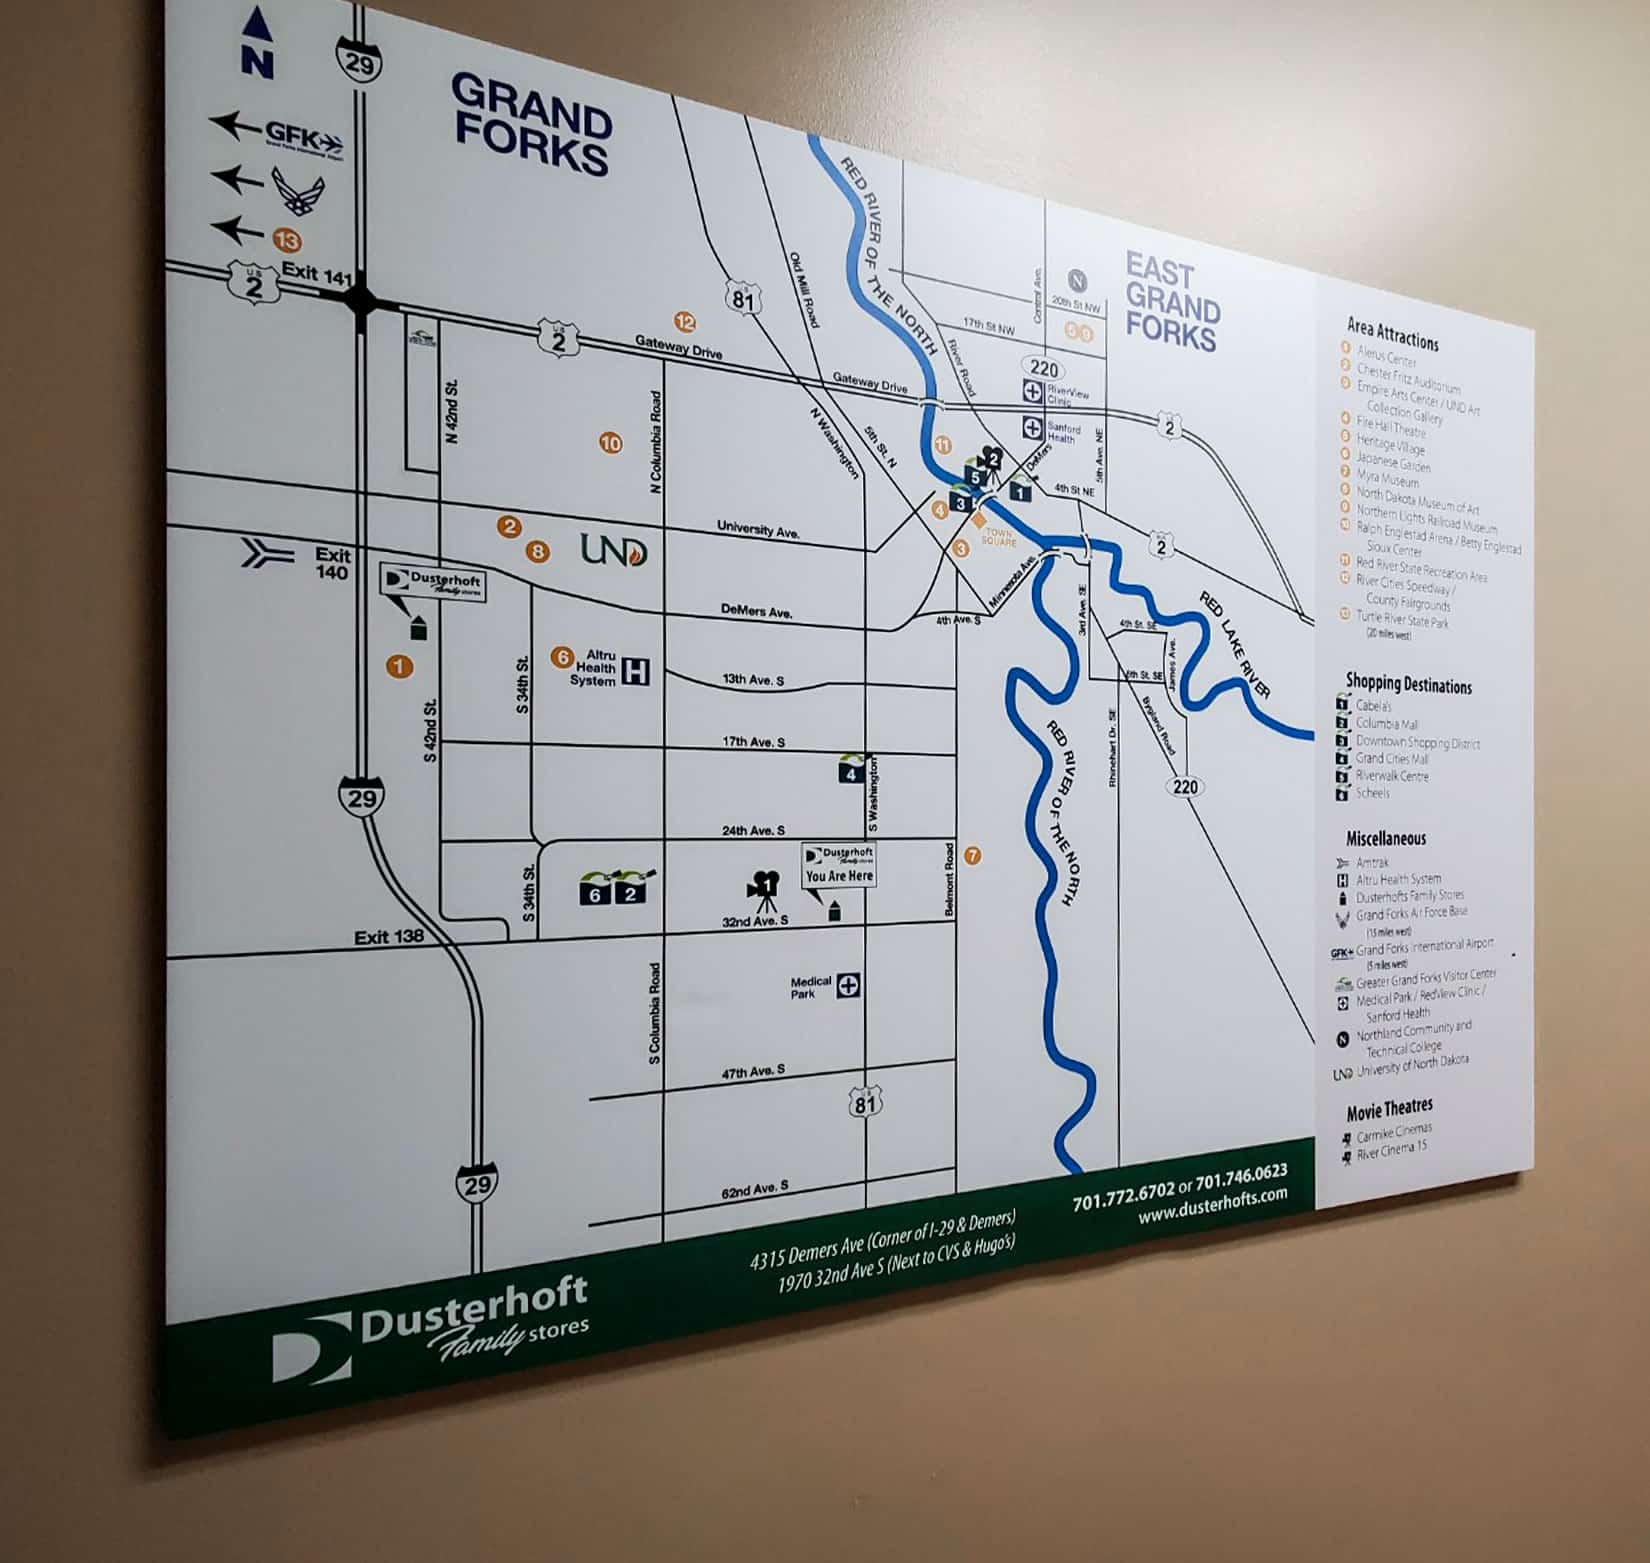 An interior sign of a Grand Forks map at Dusterhoft Family Stores